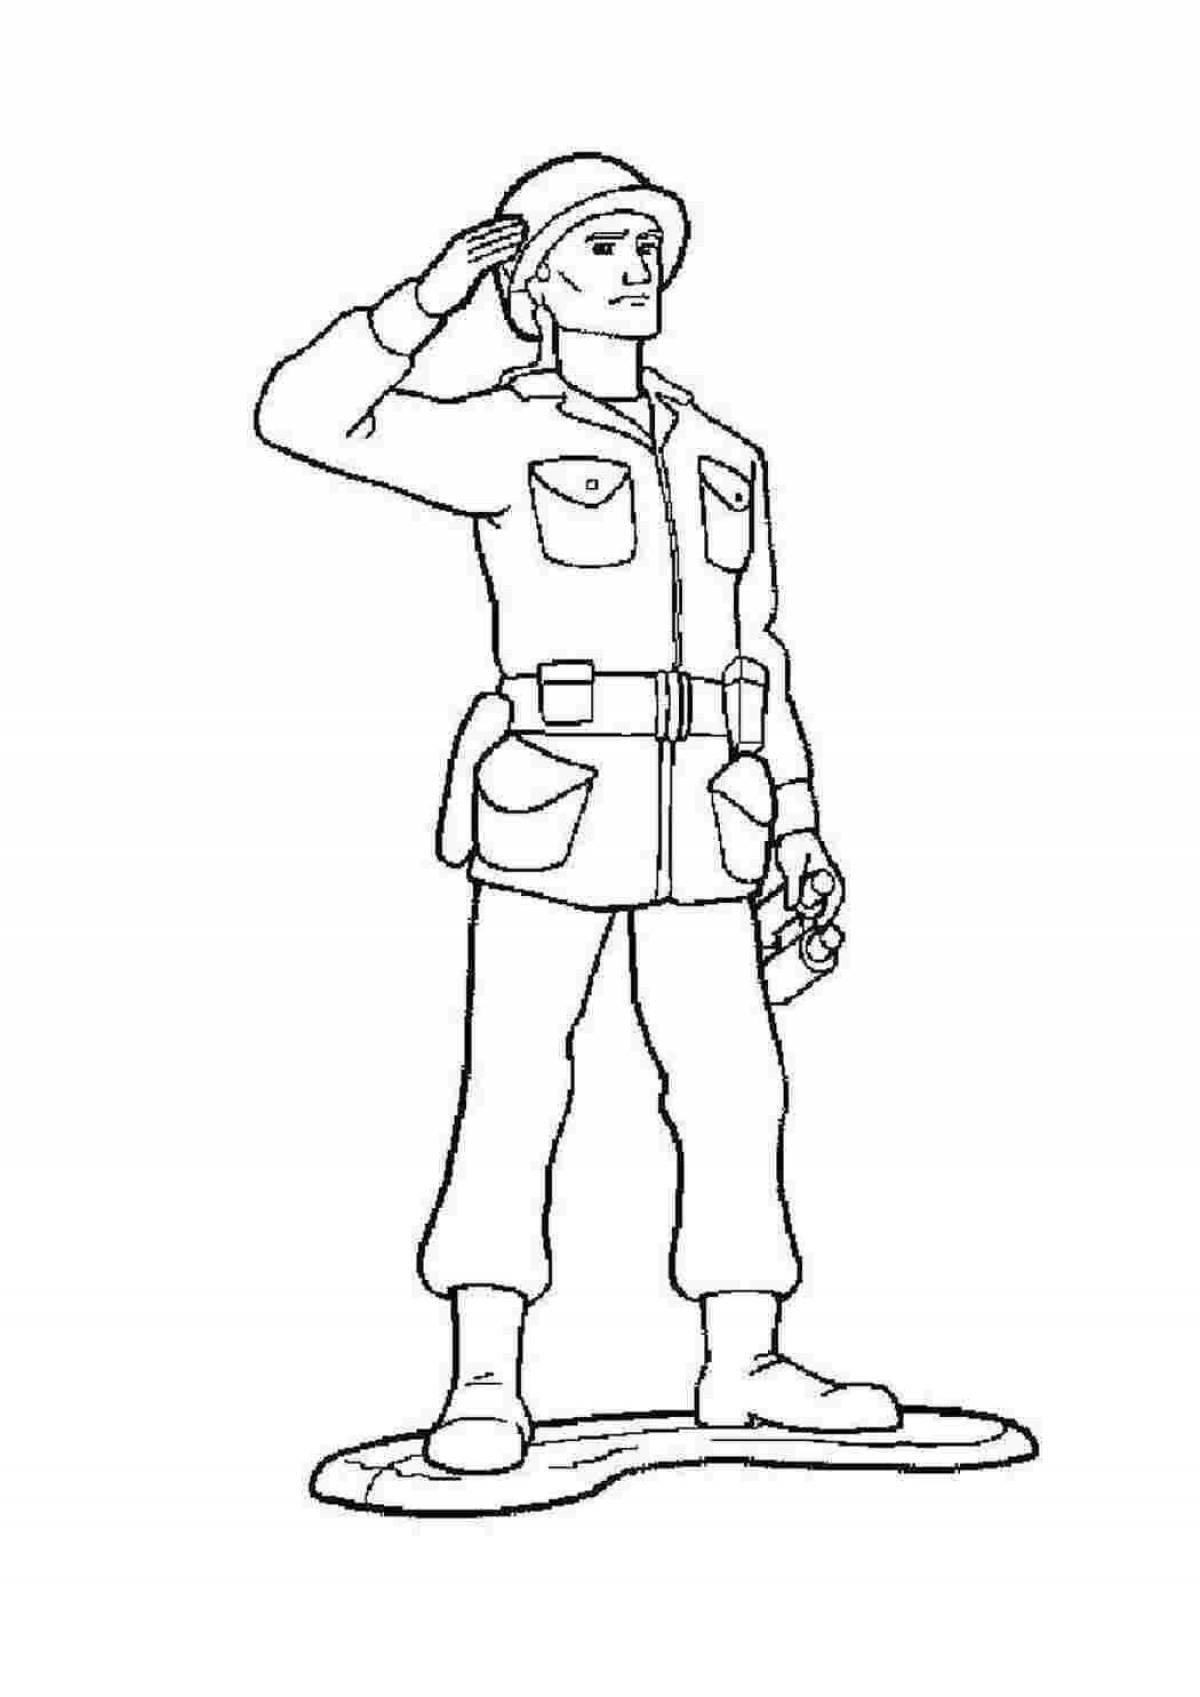 Colourful soldier coloring book for 3-4 year olds